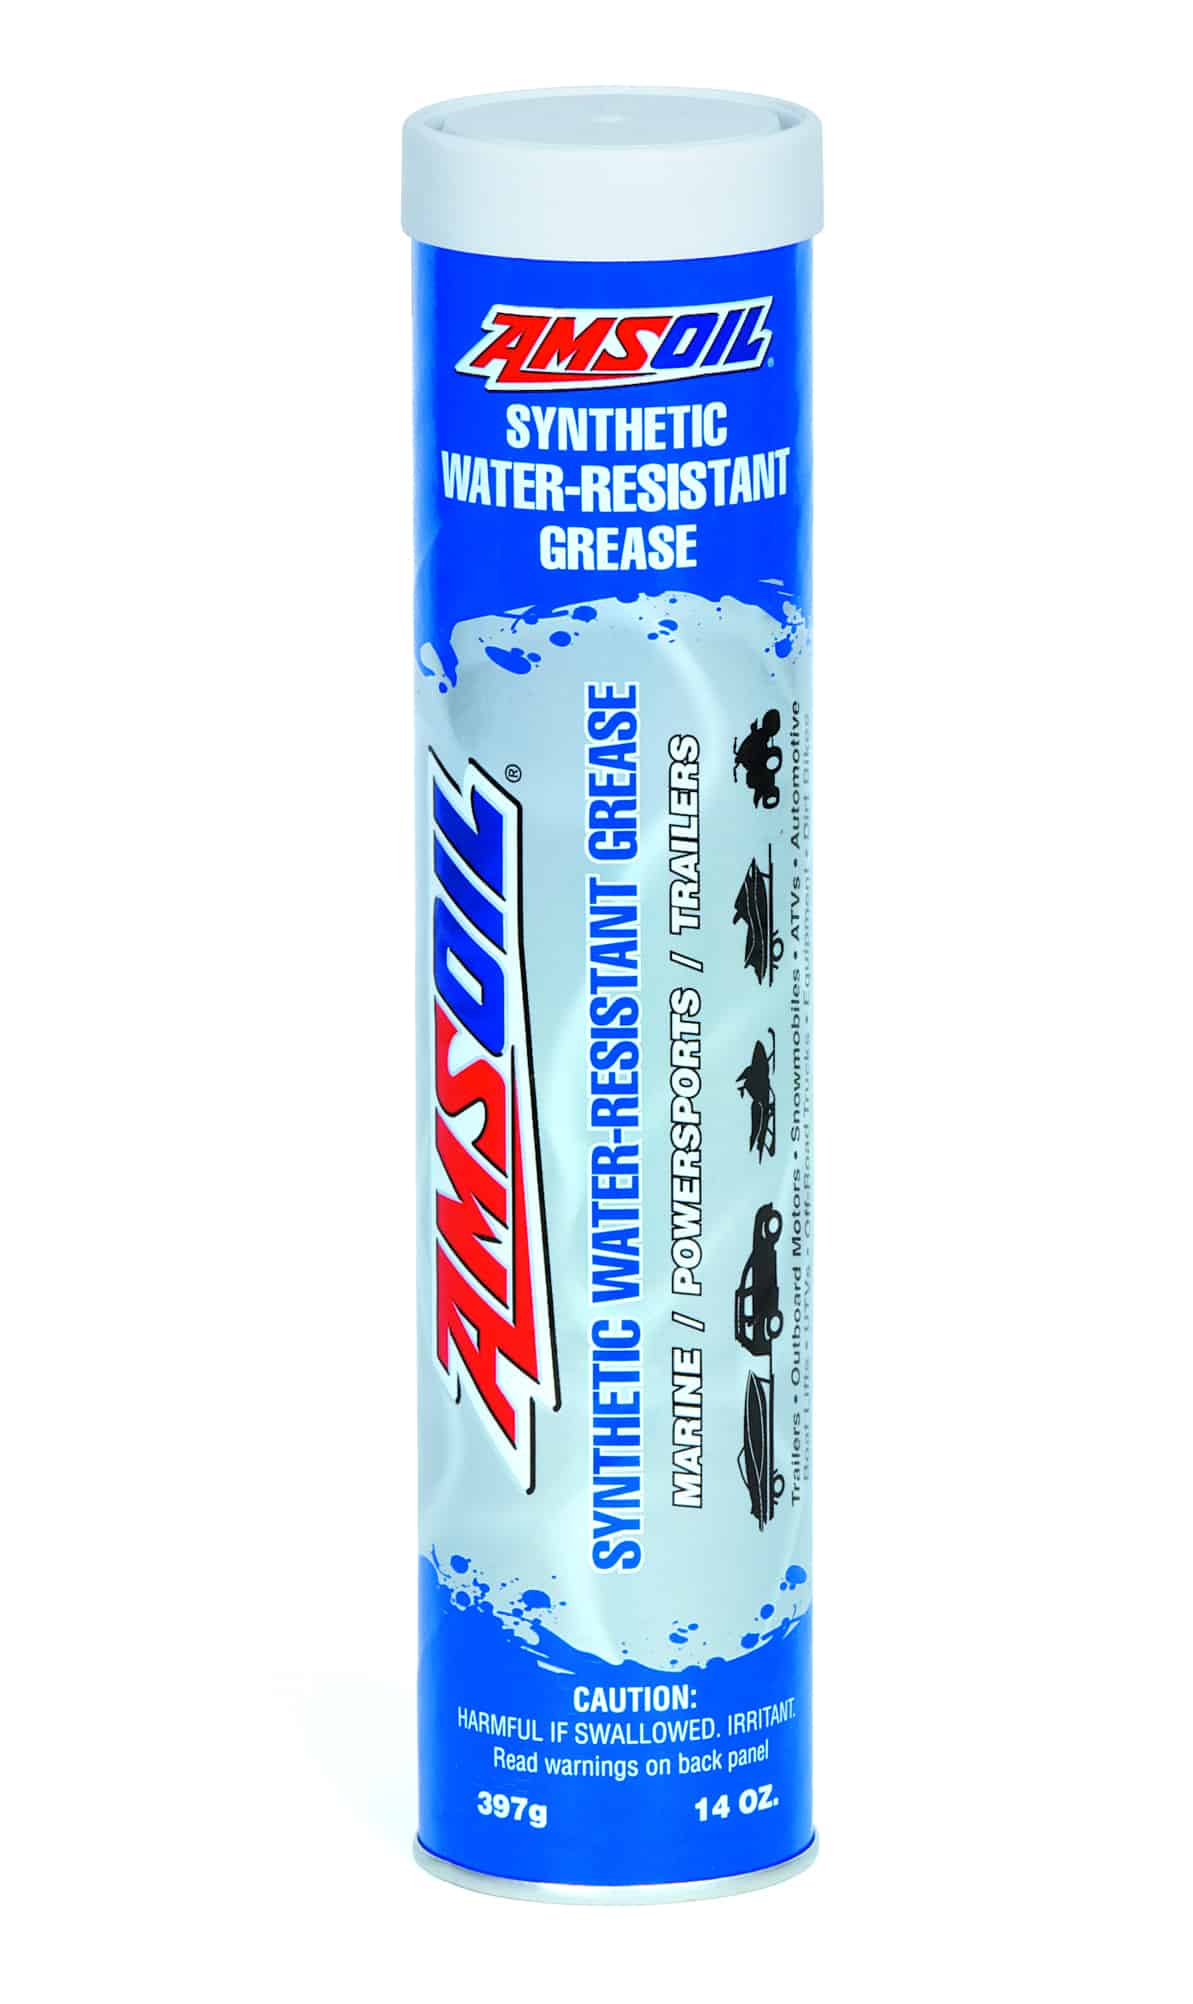 A cartridge of AMSOIL Synthetic Water-Resistant Grease, formulated to provide exceptional film strength, shear resistance, adhesion properties and mechanical stability.Changing grease is one of the trailer bearings maintenance techniques.